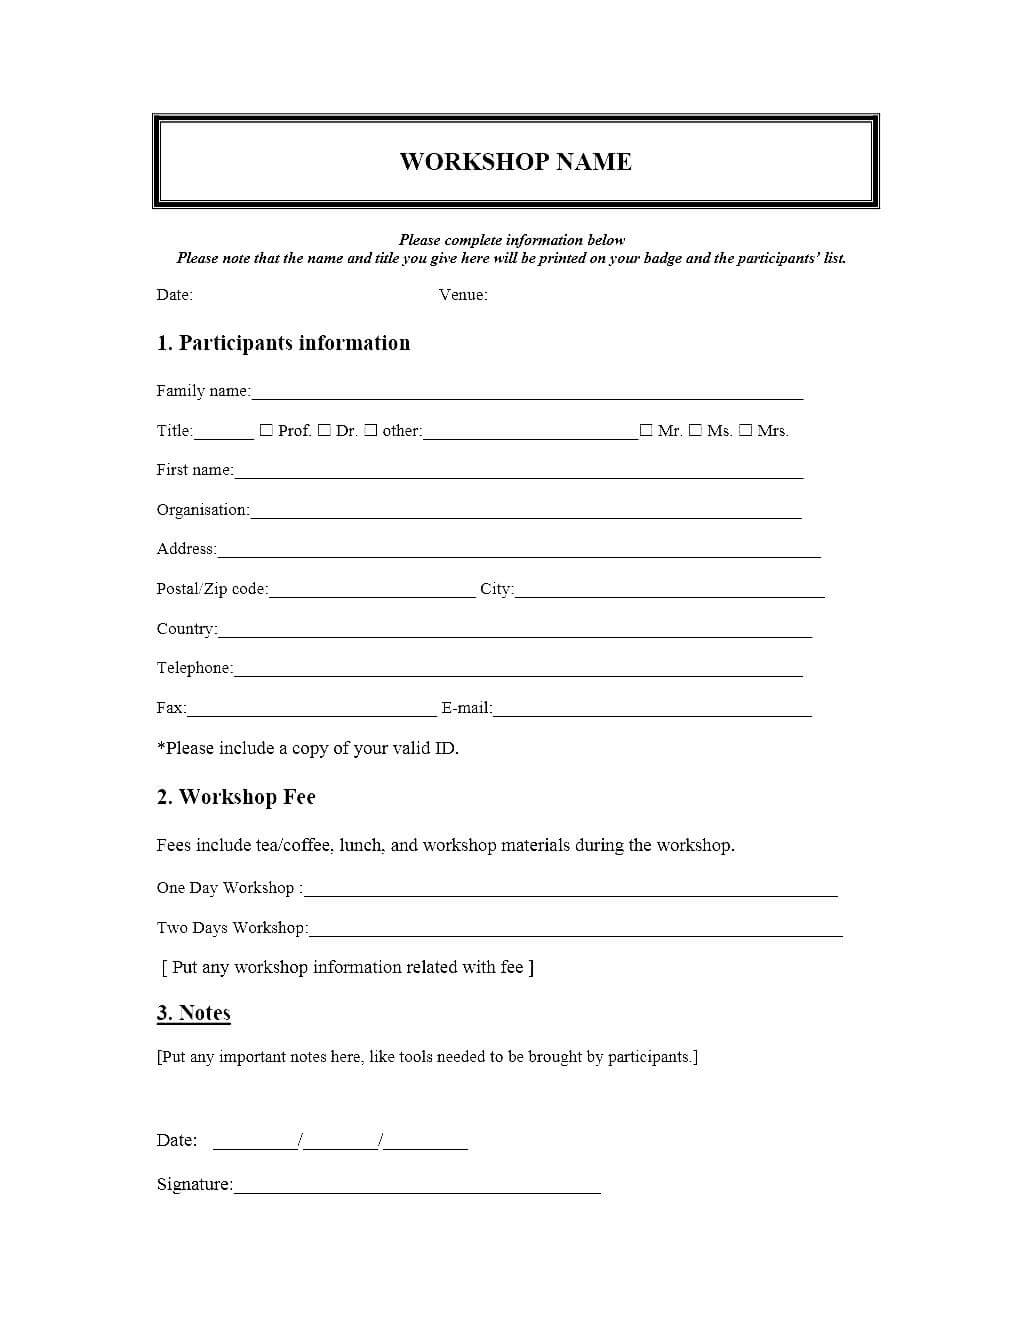 Event Istration Form Template Download Free Online In Registration Form Template Word Free